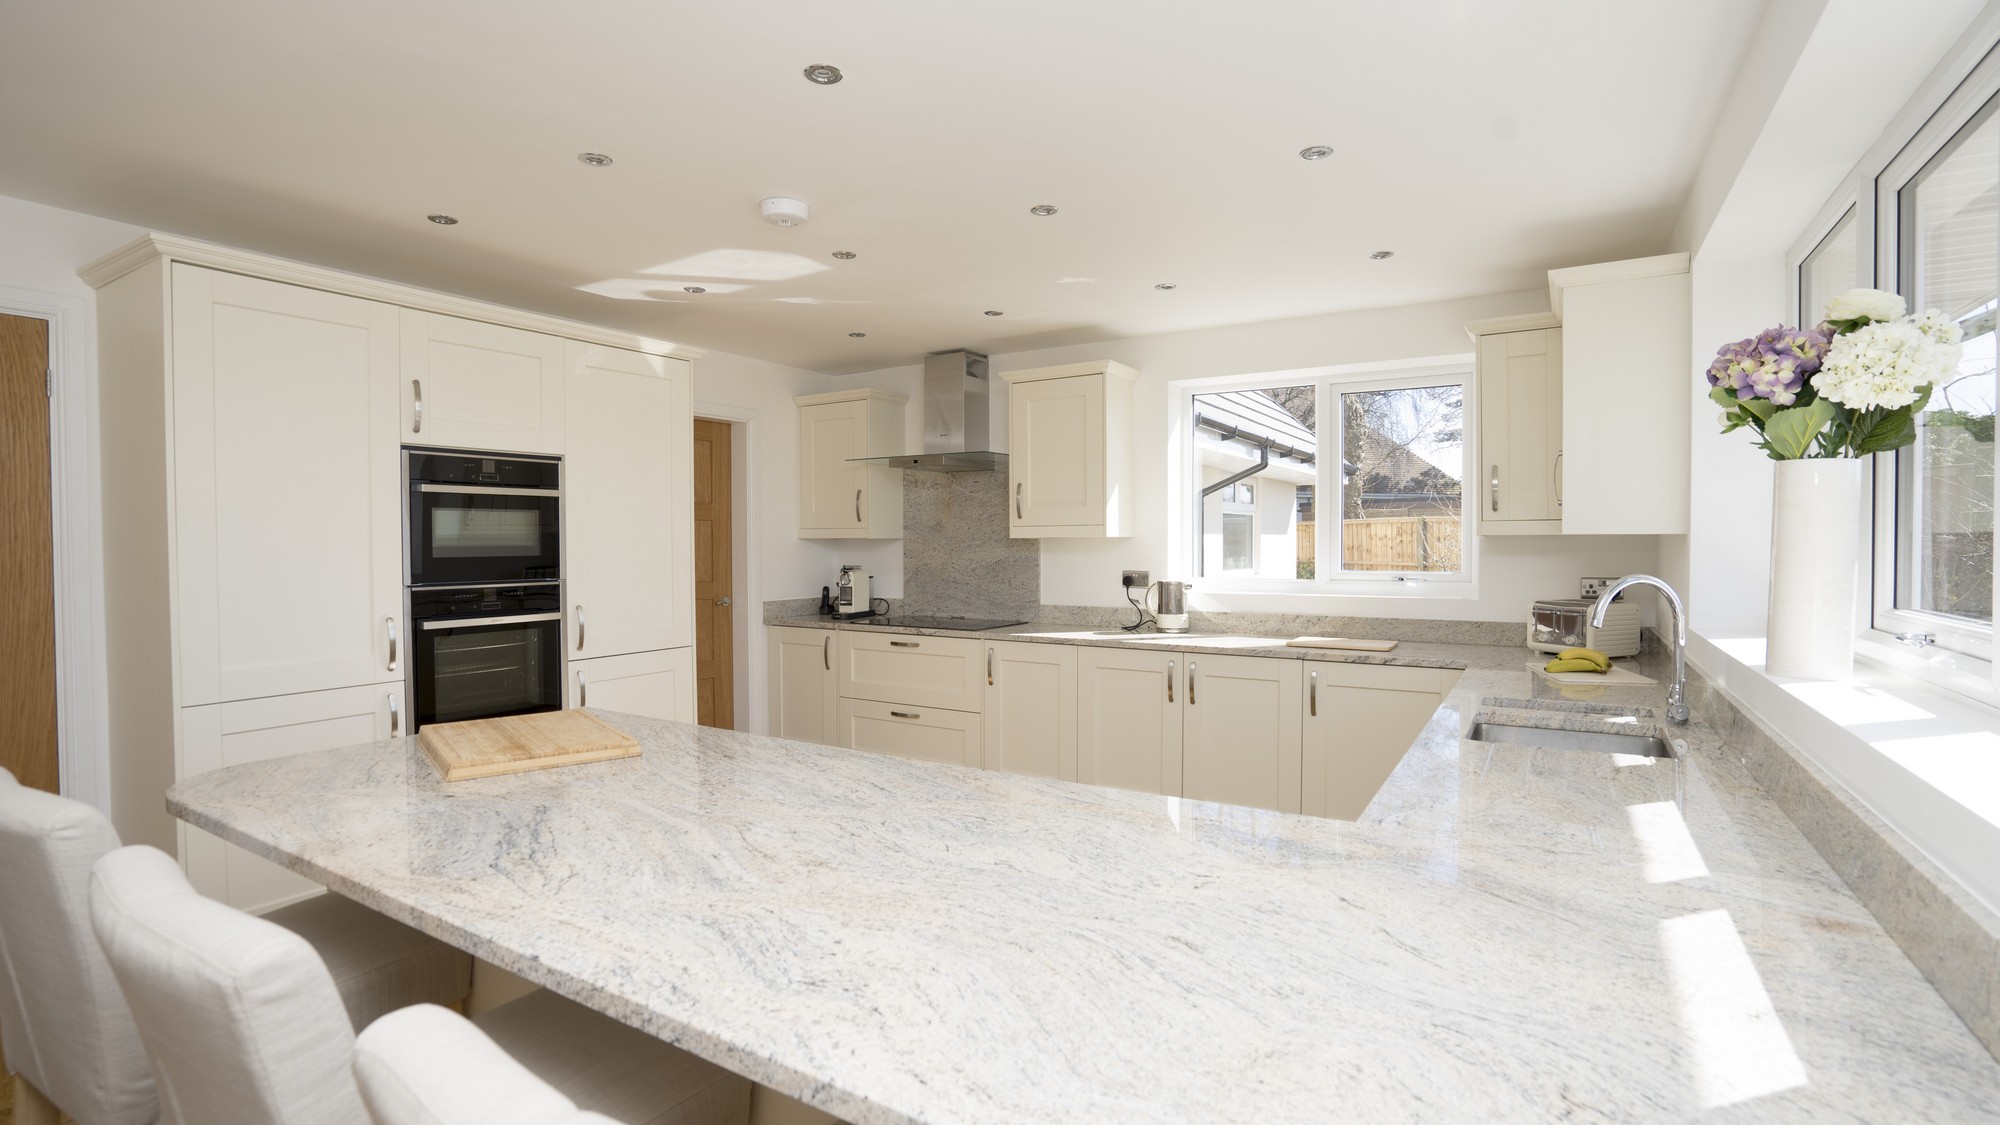 Large Ivory shaker kitchen with stainless steel handles and granite worktops. The granite has been cantilevered over the kitchen cupboards to create an island style dining area.